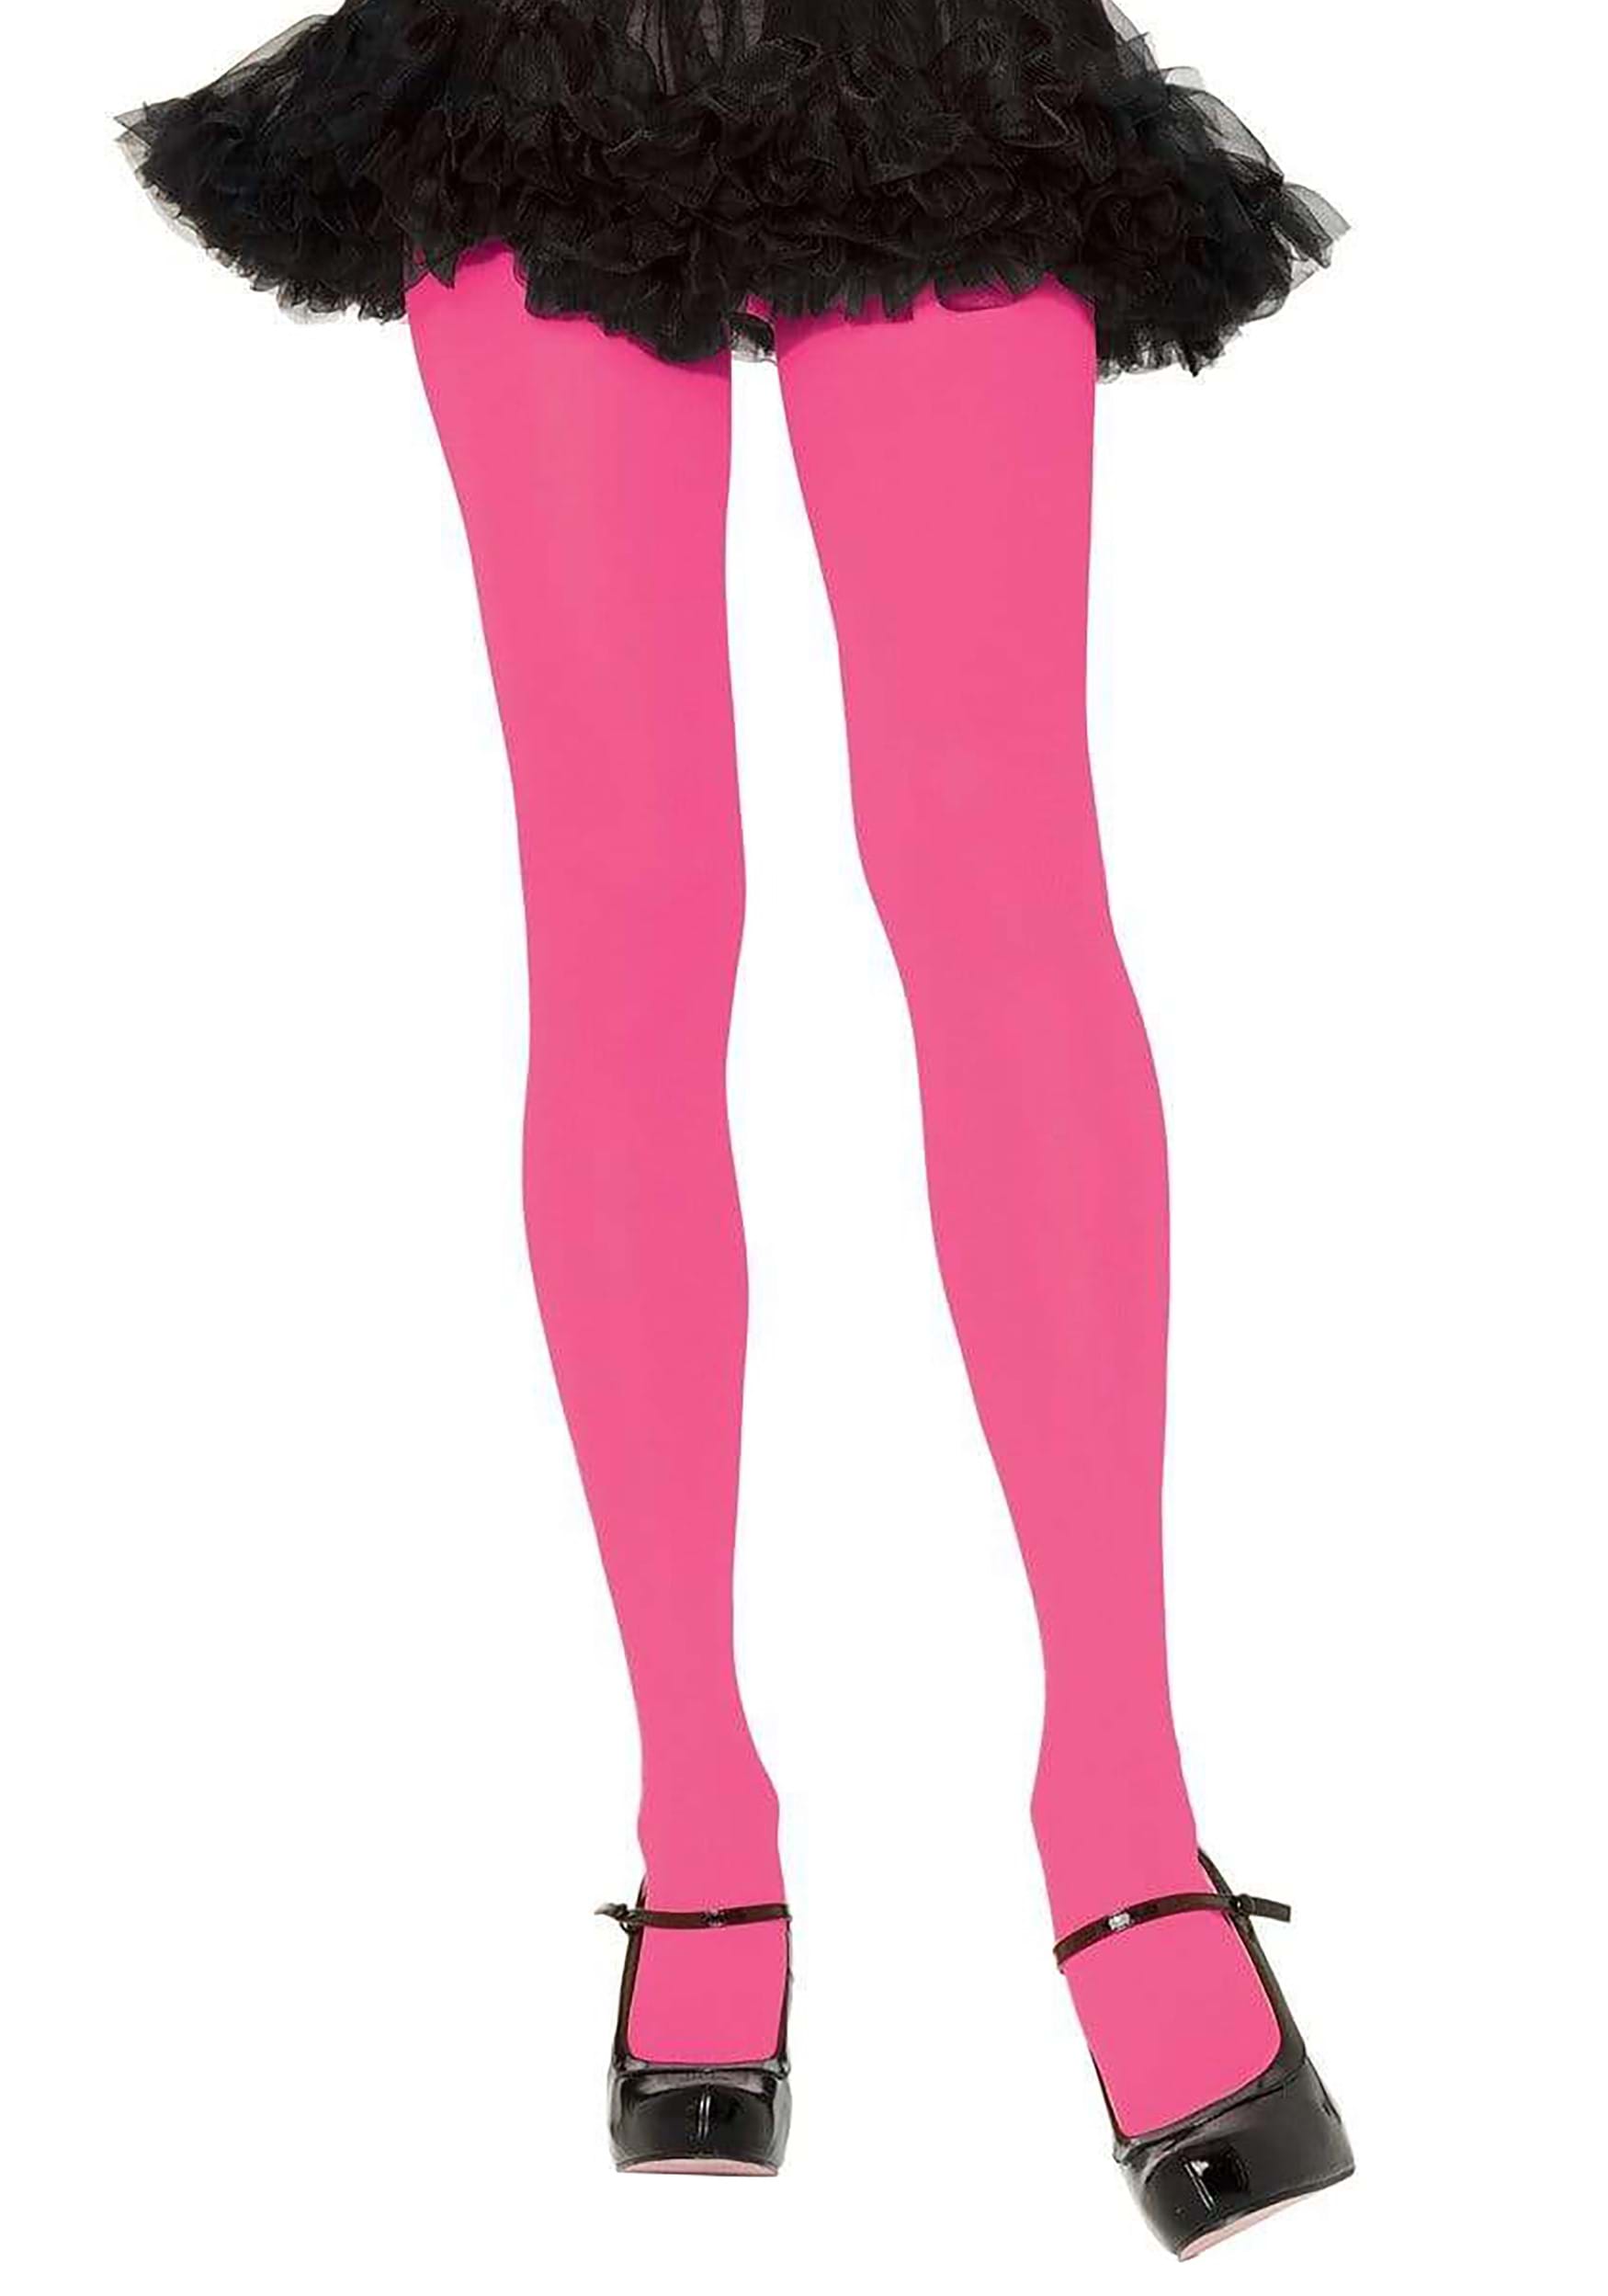 https://images.halloweencostumes.com/products/71968/1-1/womens-pink-nylon-opaque-tights.jpg